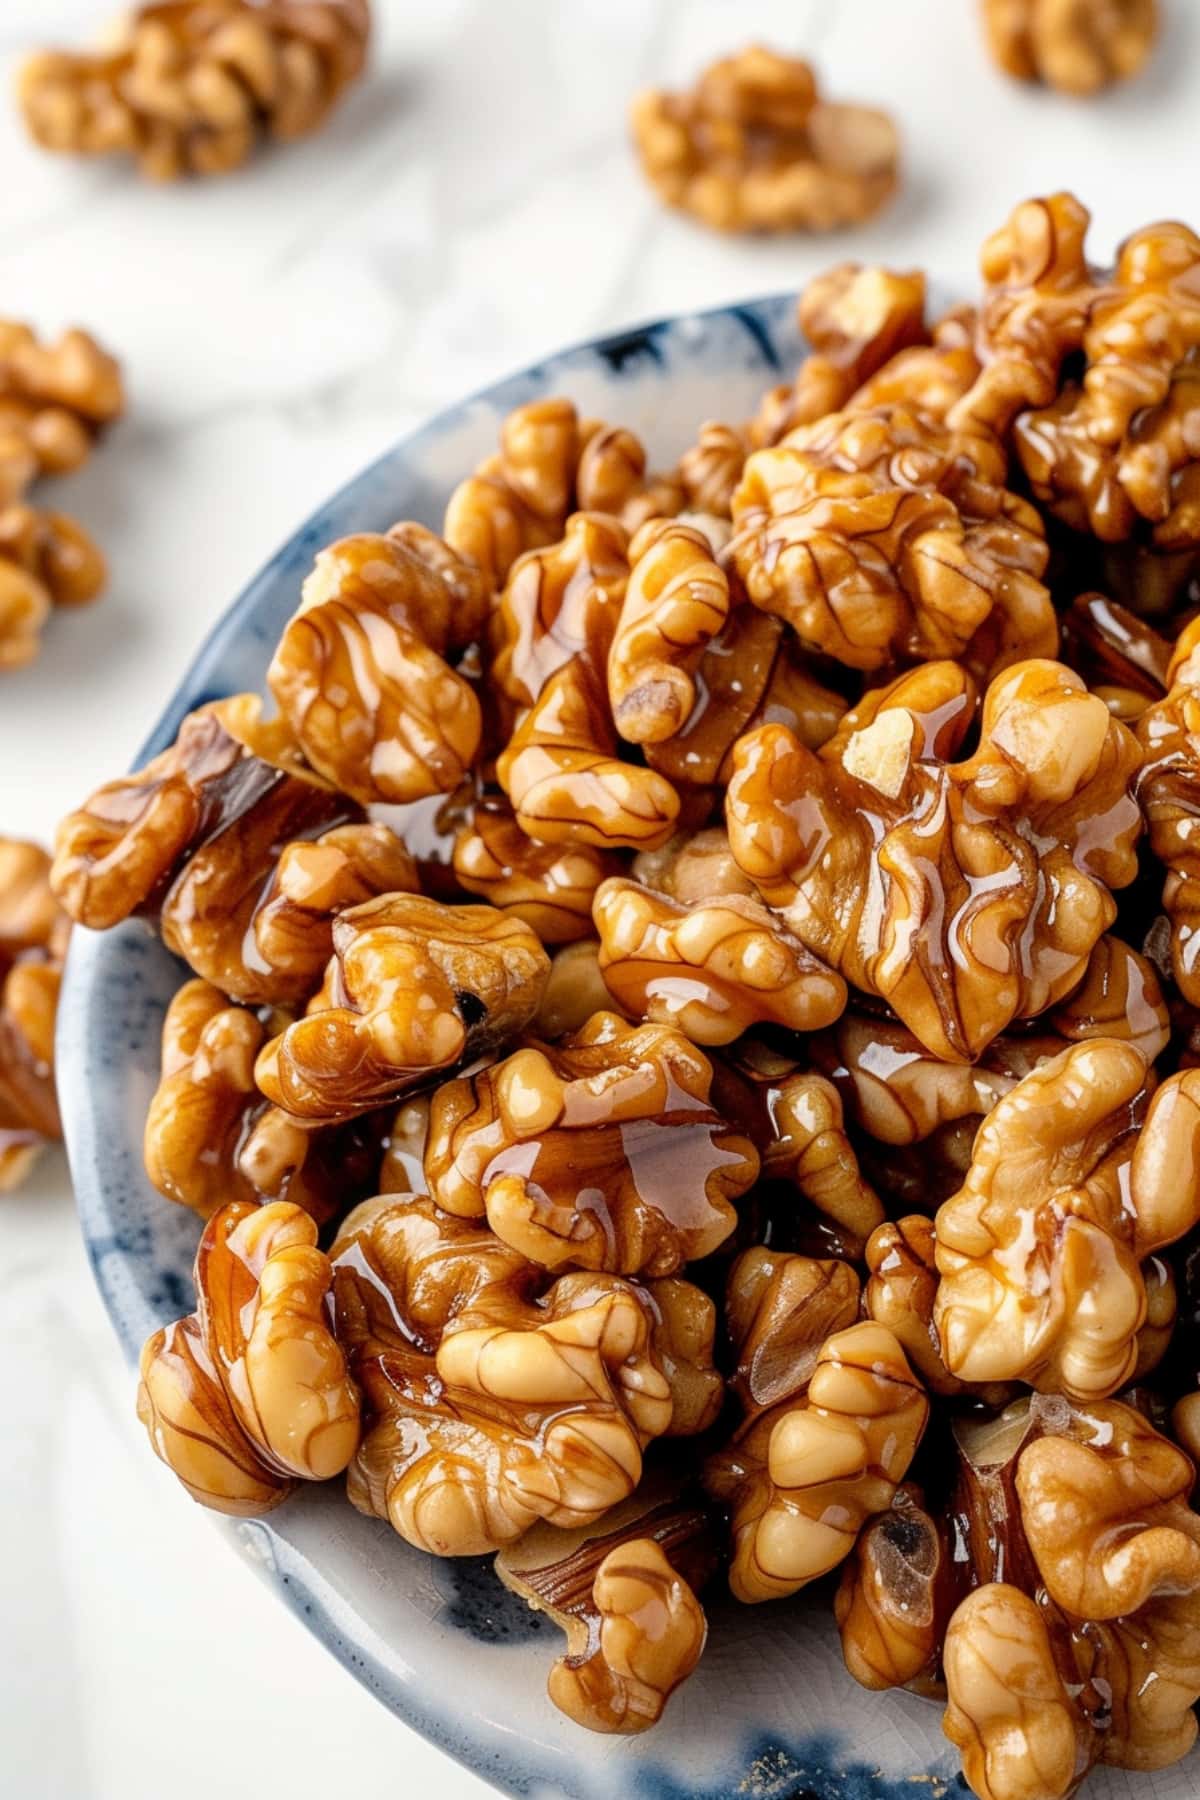 Sweet and buttery candied walnuts on a white marble table